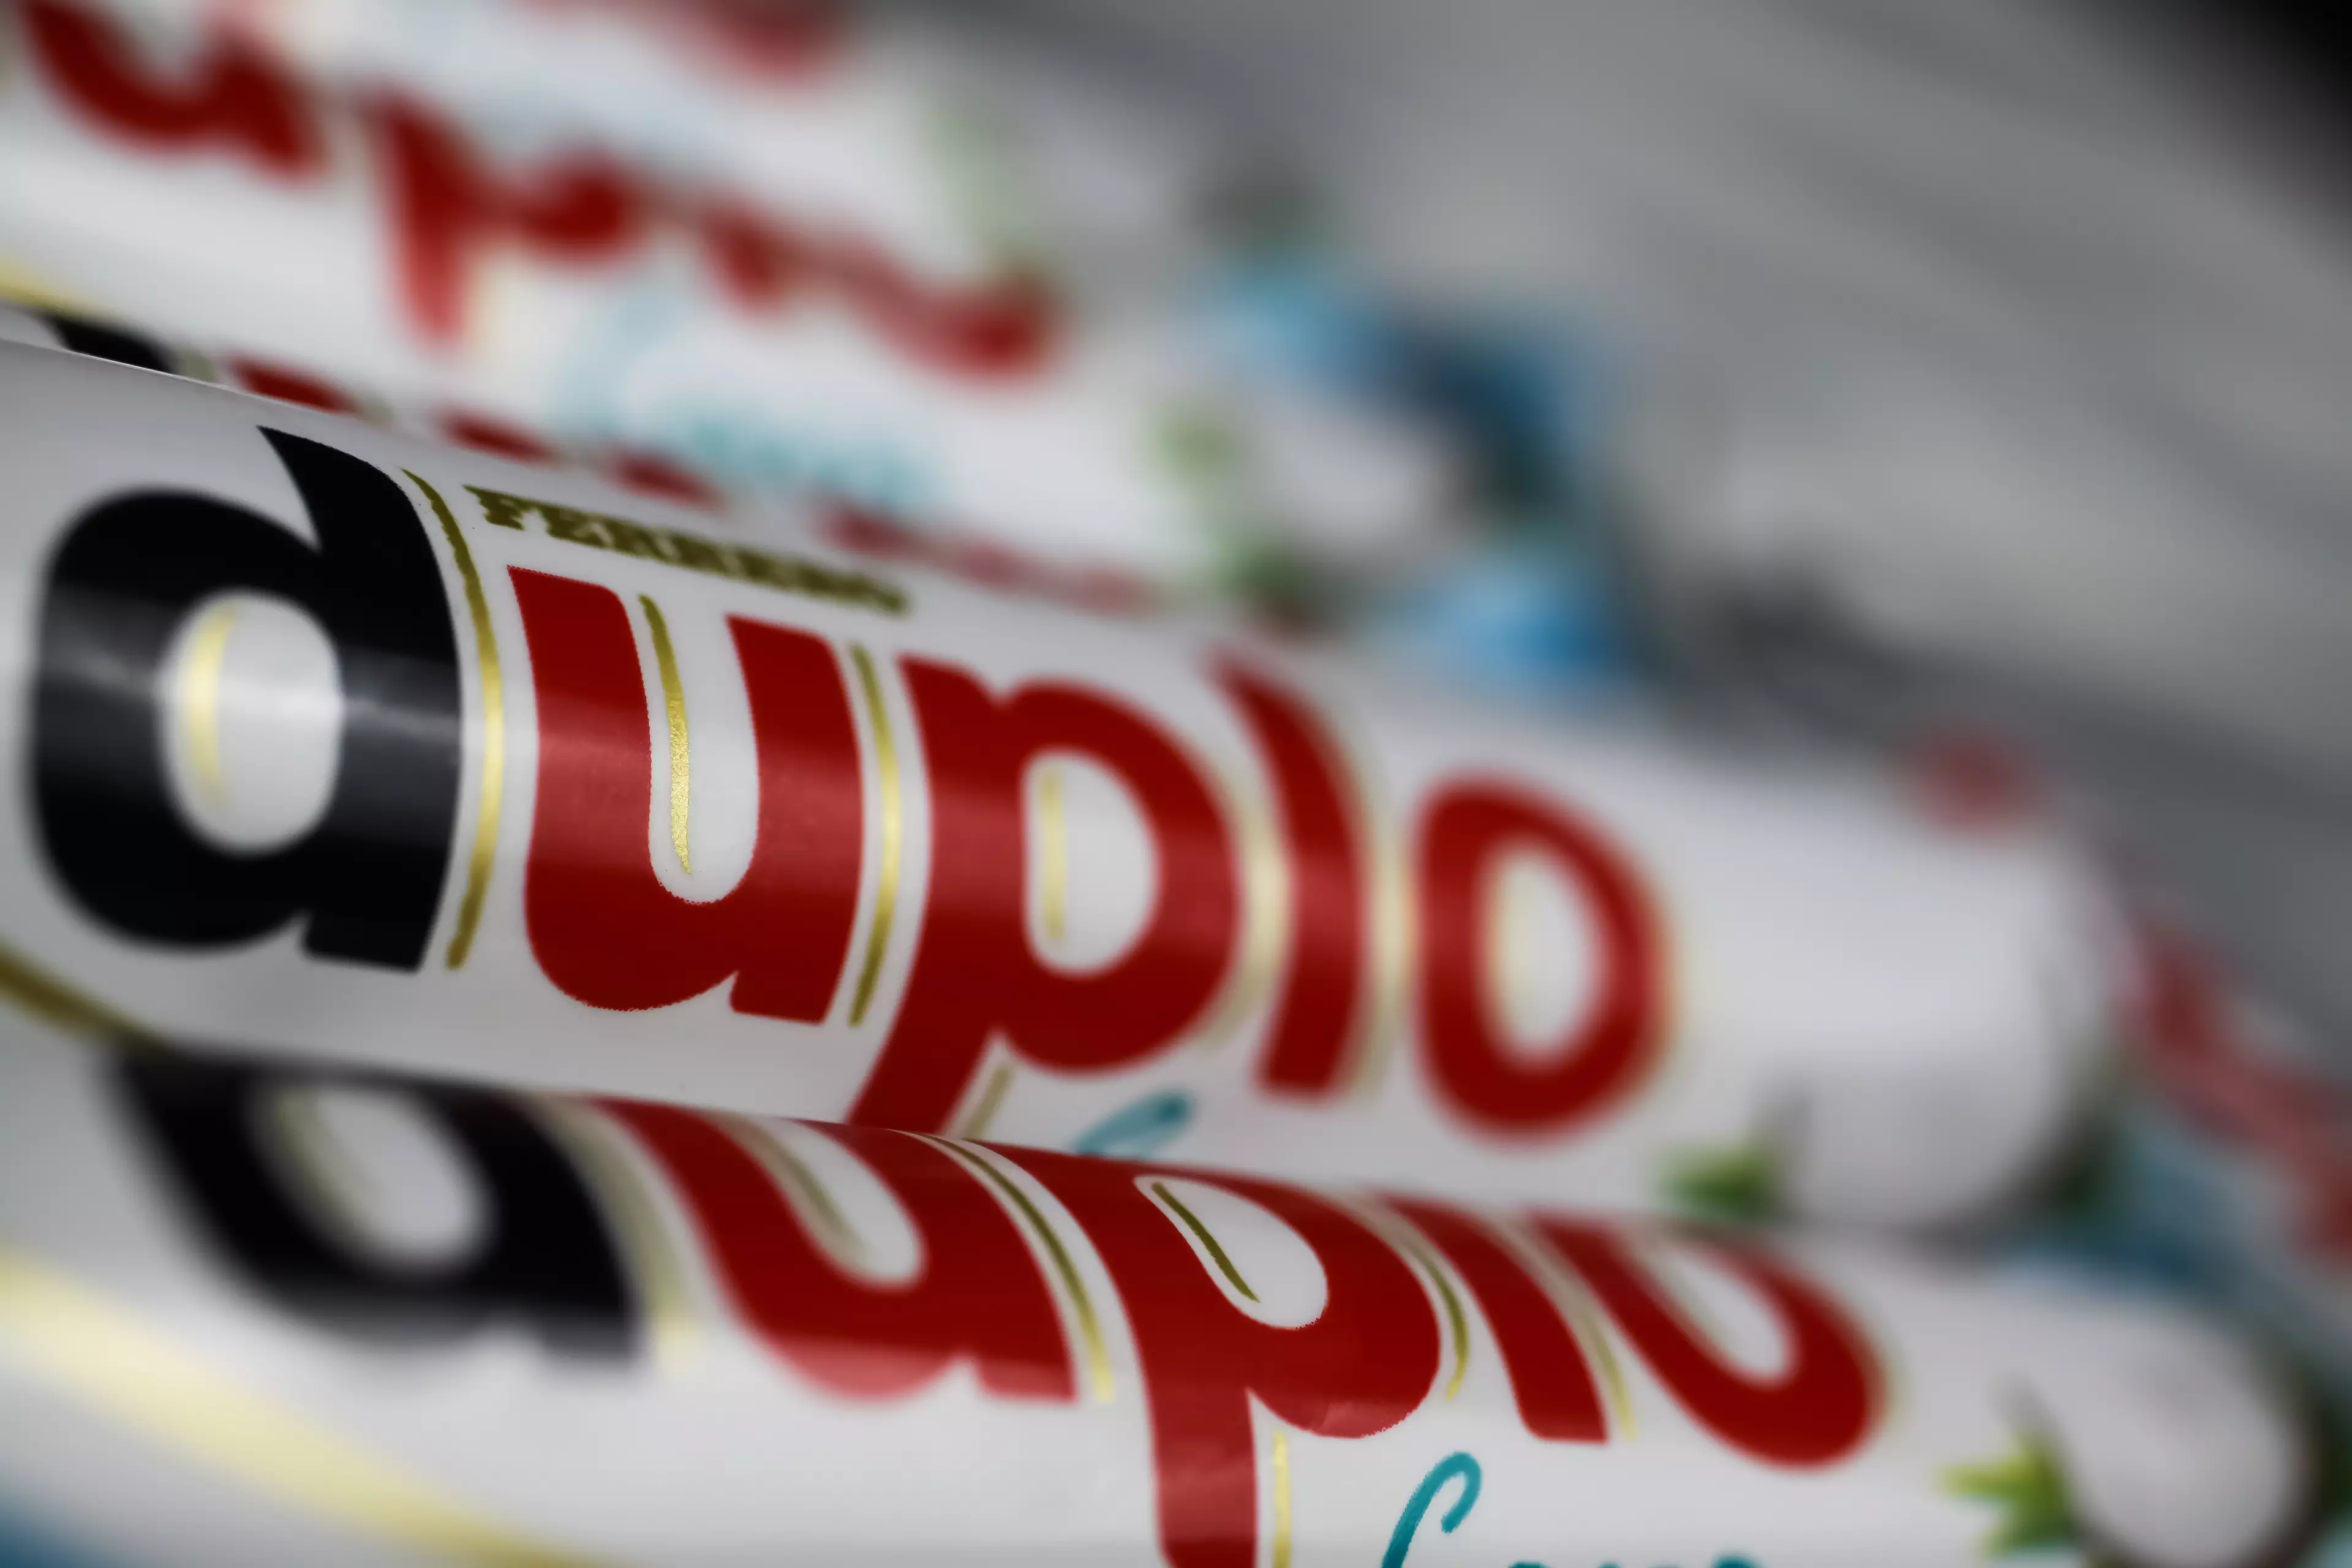 The Duplo can now be purchased in the UK and Ireland (